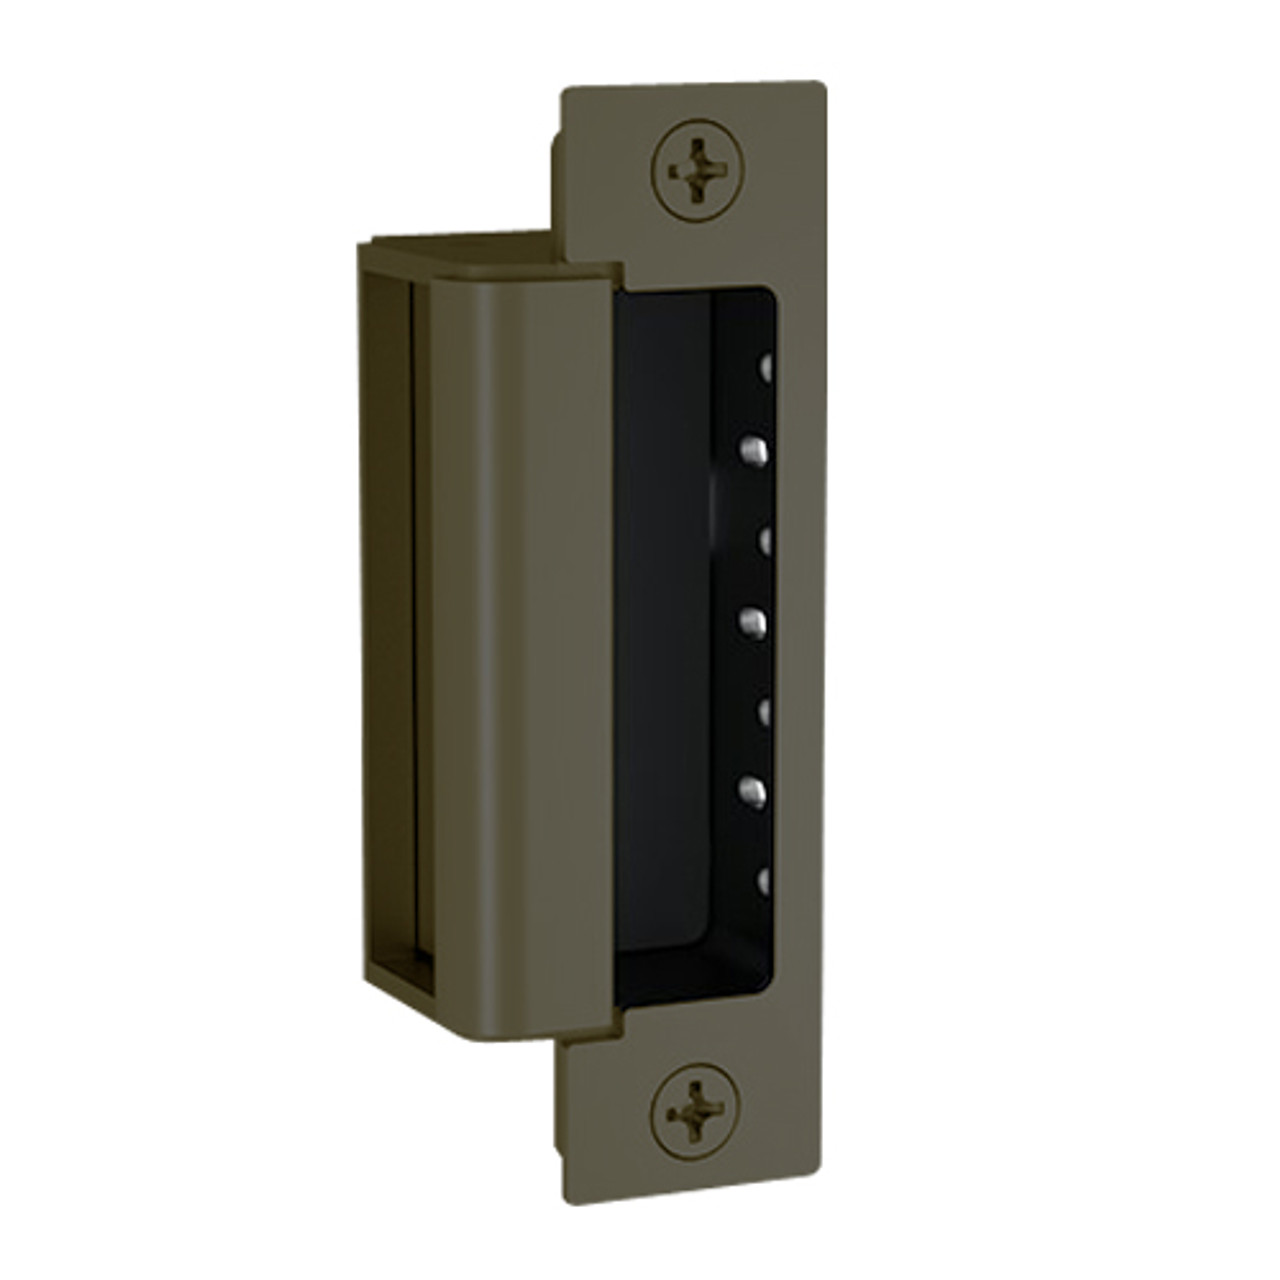 1600-CS-DLM-613E Hes 1600 Series Dynamic Complete Low Profile Electric Strike for Latchbolt and Deadbolt Lock with Dual Lock Monitor in Dark Oxidized Satin Bronze